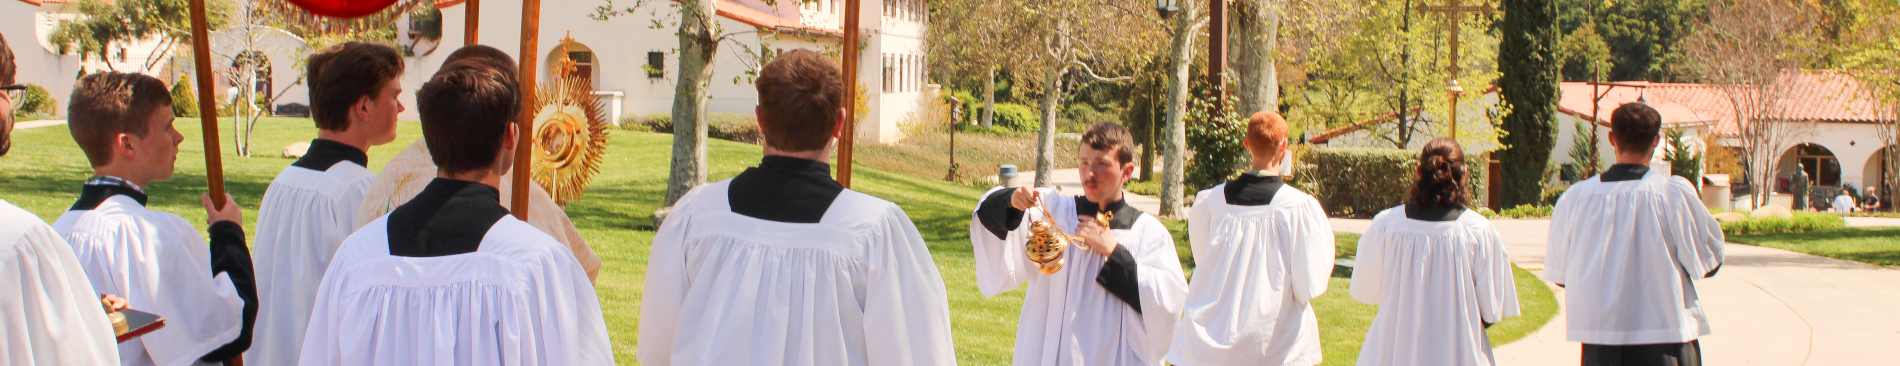 The thurifer incenses Fr. Marczewski and the monstrance